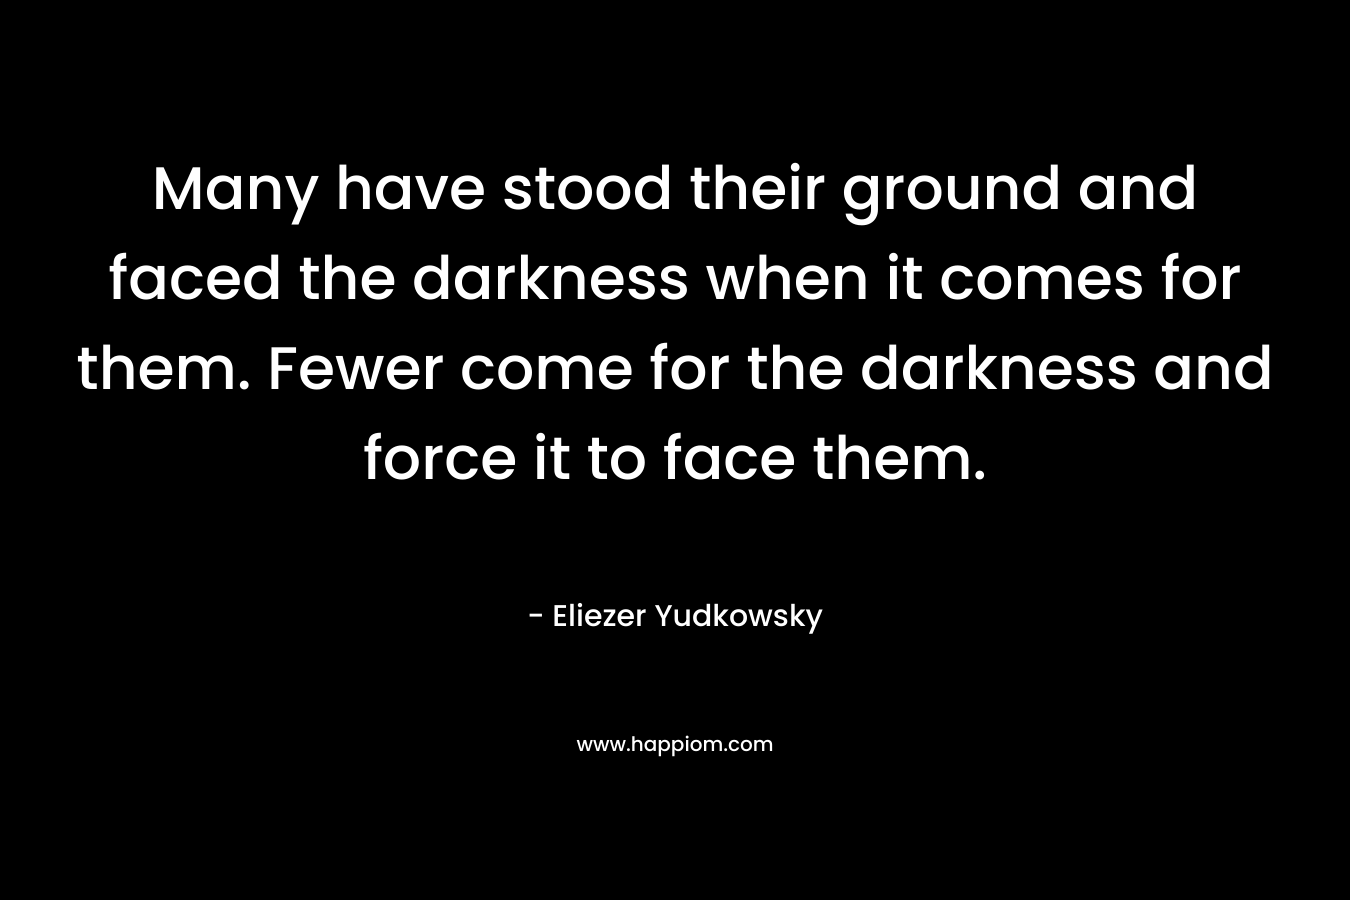 Many have stood their ground and faced the darkness when it comes for them. Fewer come for the darkness and force it to face them. – Eliezer Yudkowsky